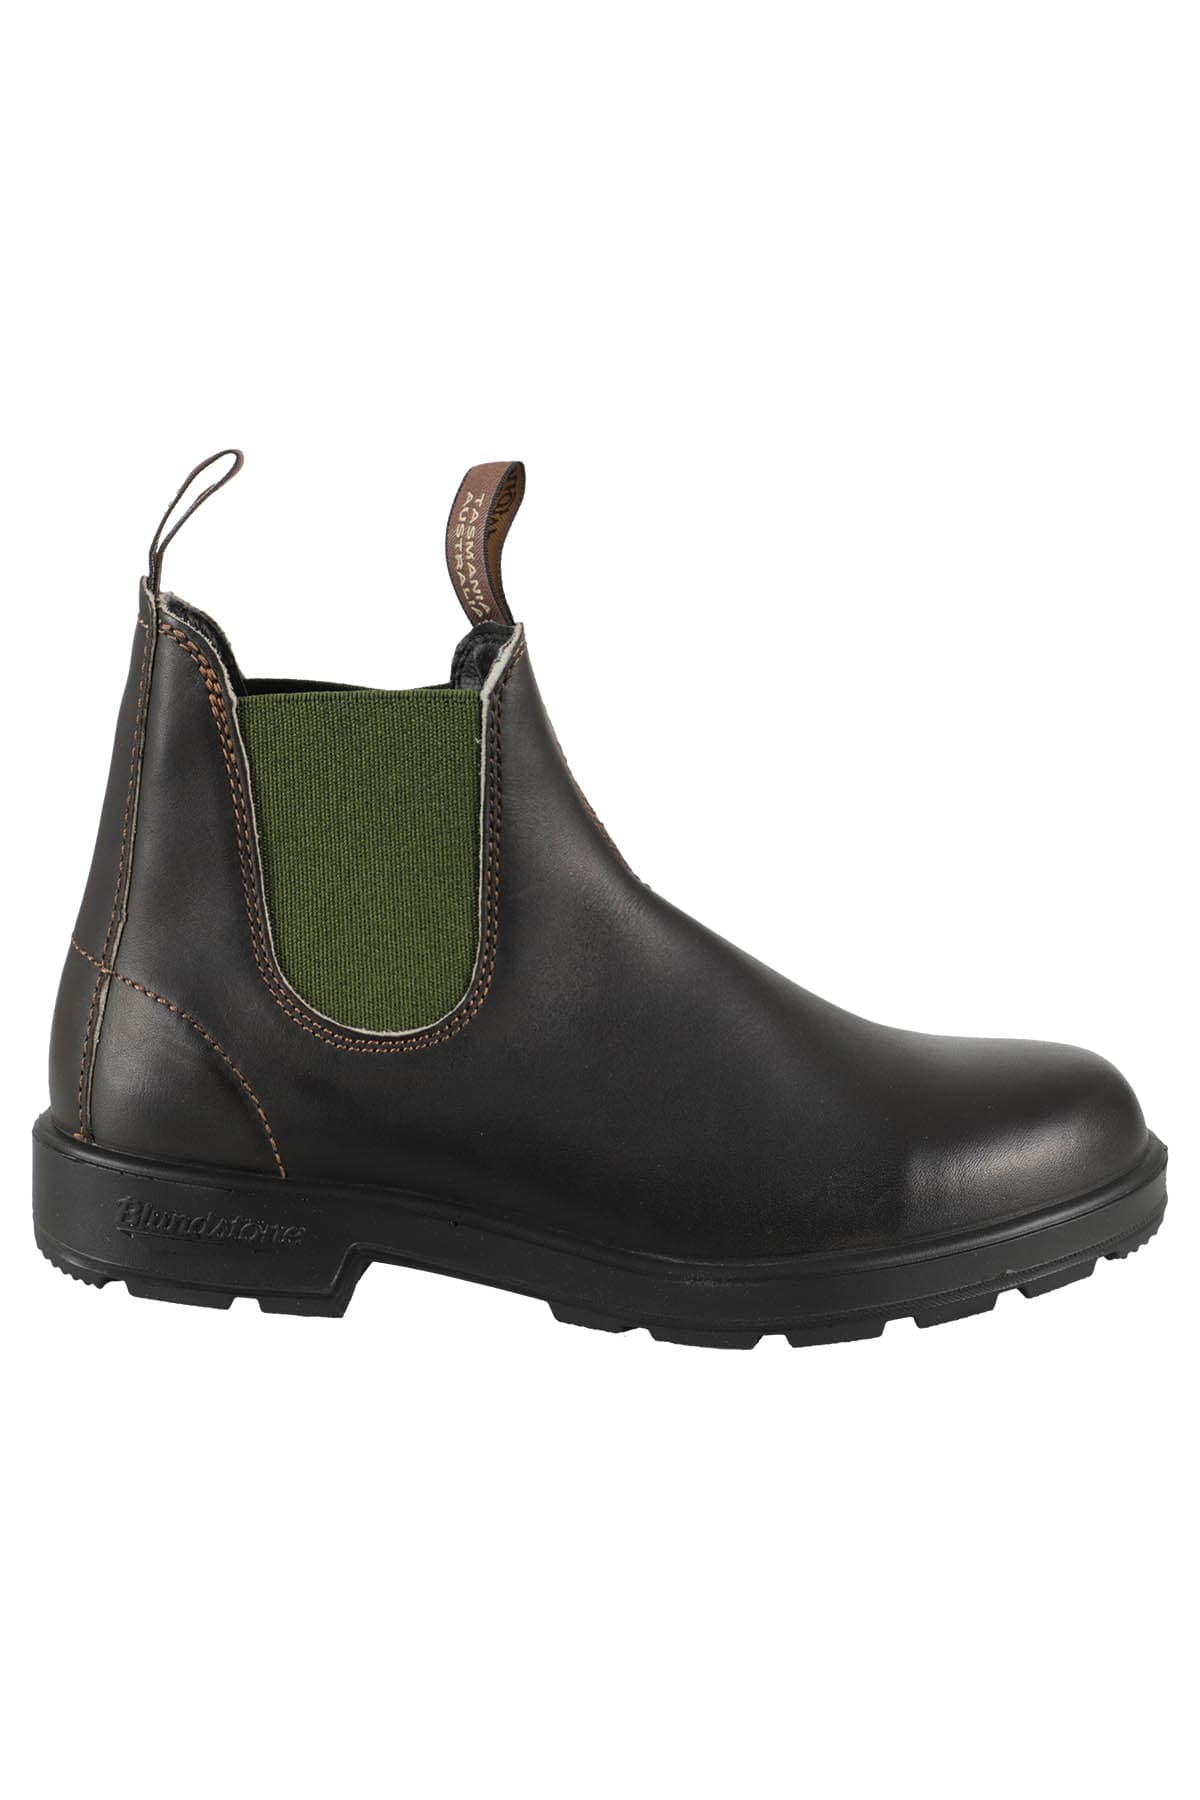 Blundstone Leather In Brown Olive